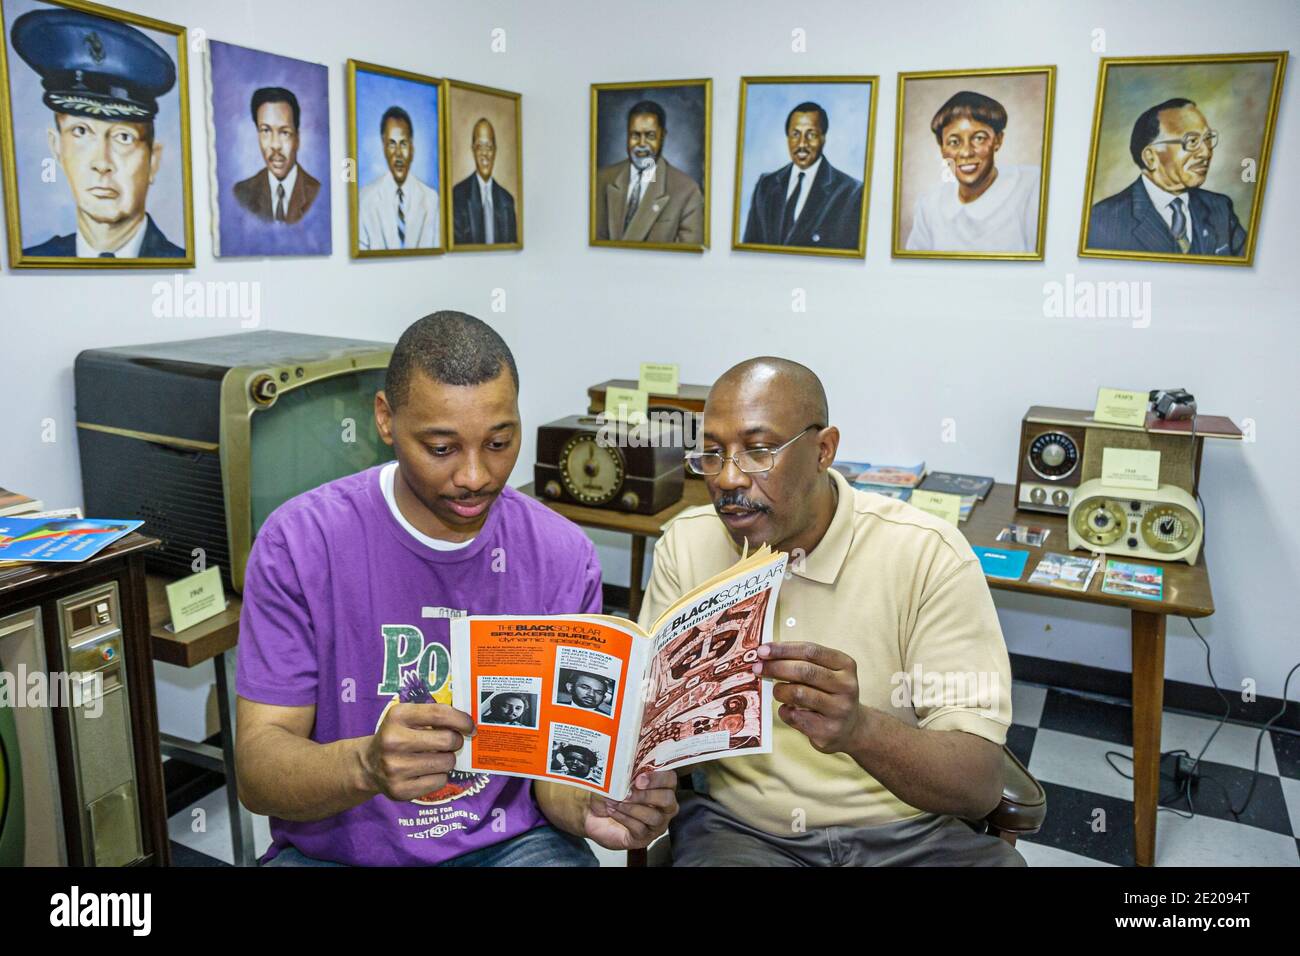 Alabama Mobile Africa Town Welcome Center centre exhibit man,Black History father adult son looking reading exhibit, Stock Photo